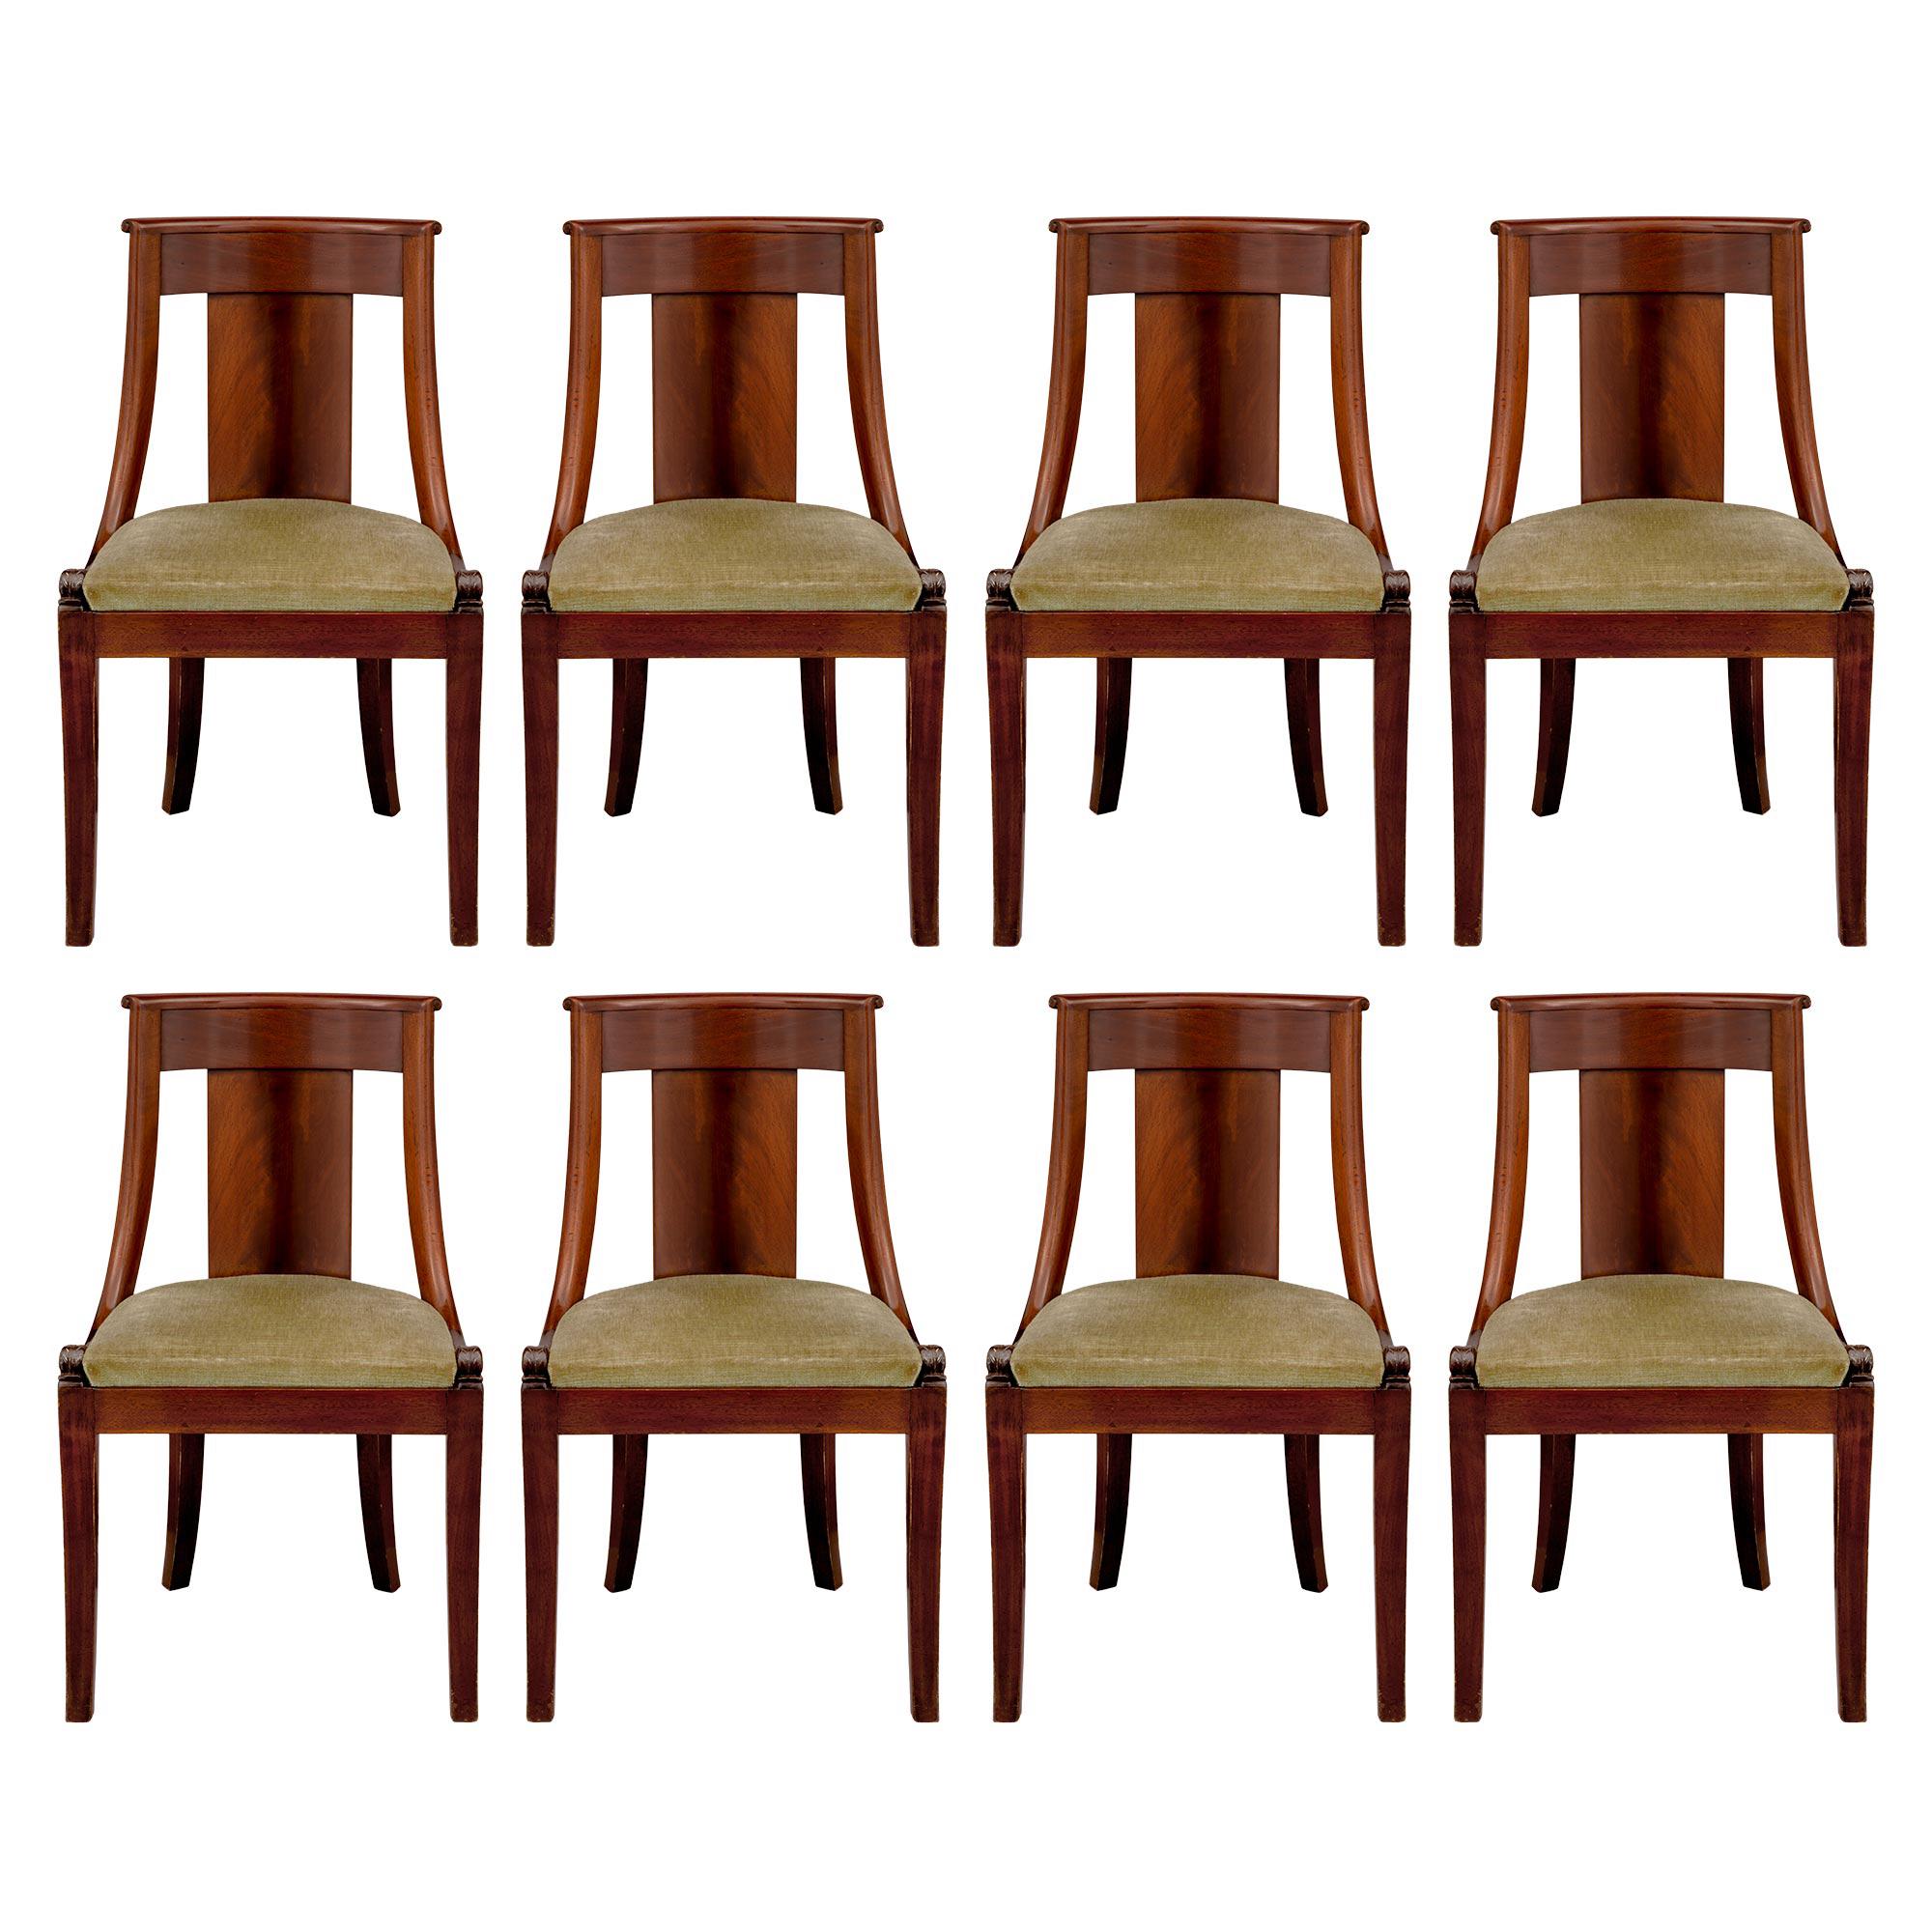 Set of Eight French 19th Century Empire Style Mahogany Side/Dining Chairs